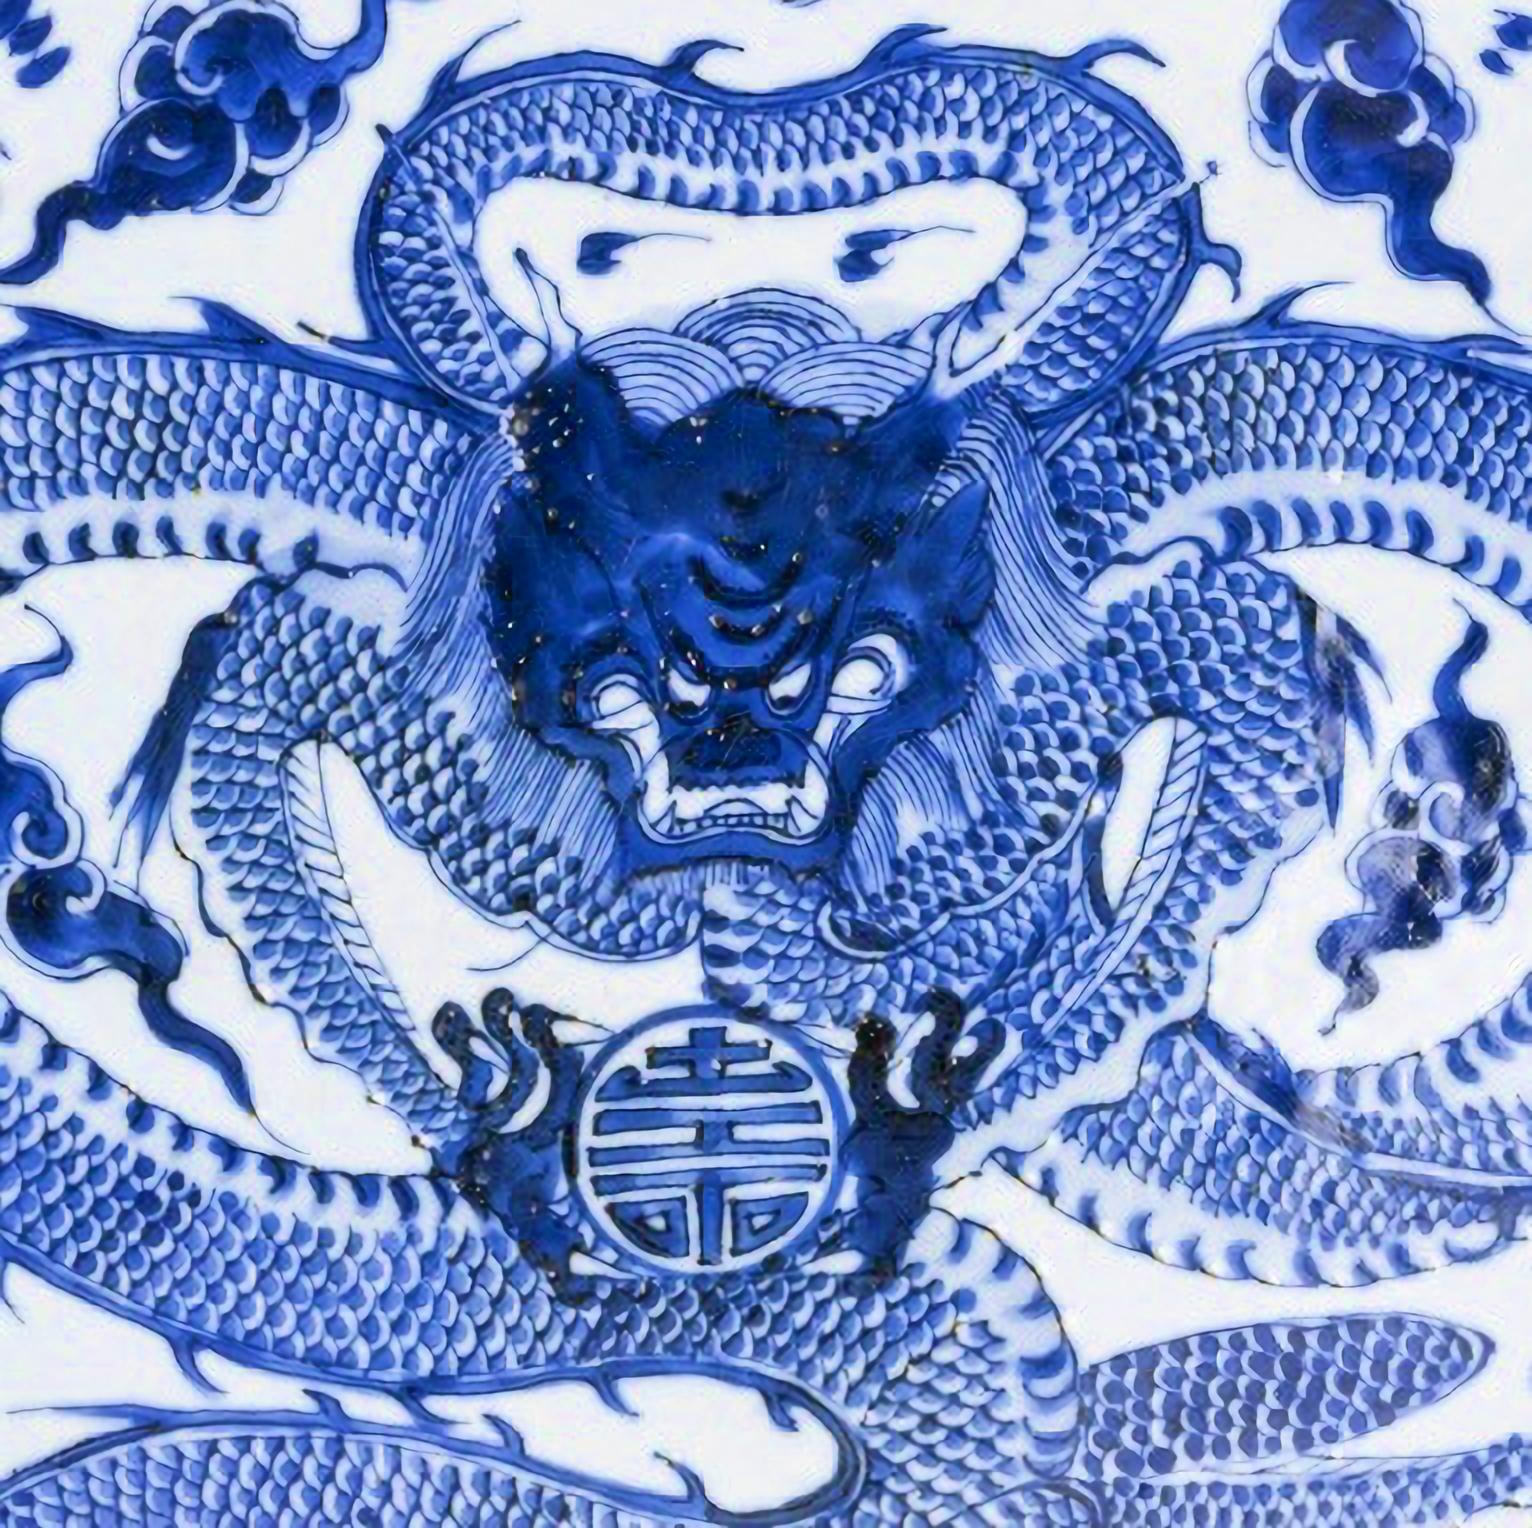 LARGE PLATE 19th Century

Porcelain from China,
painted in blue on cobalt blue,
with a large protruding, stylized dragon in the center.
Small chip.
Dia.: 50 cm
good conditions